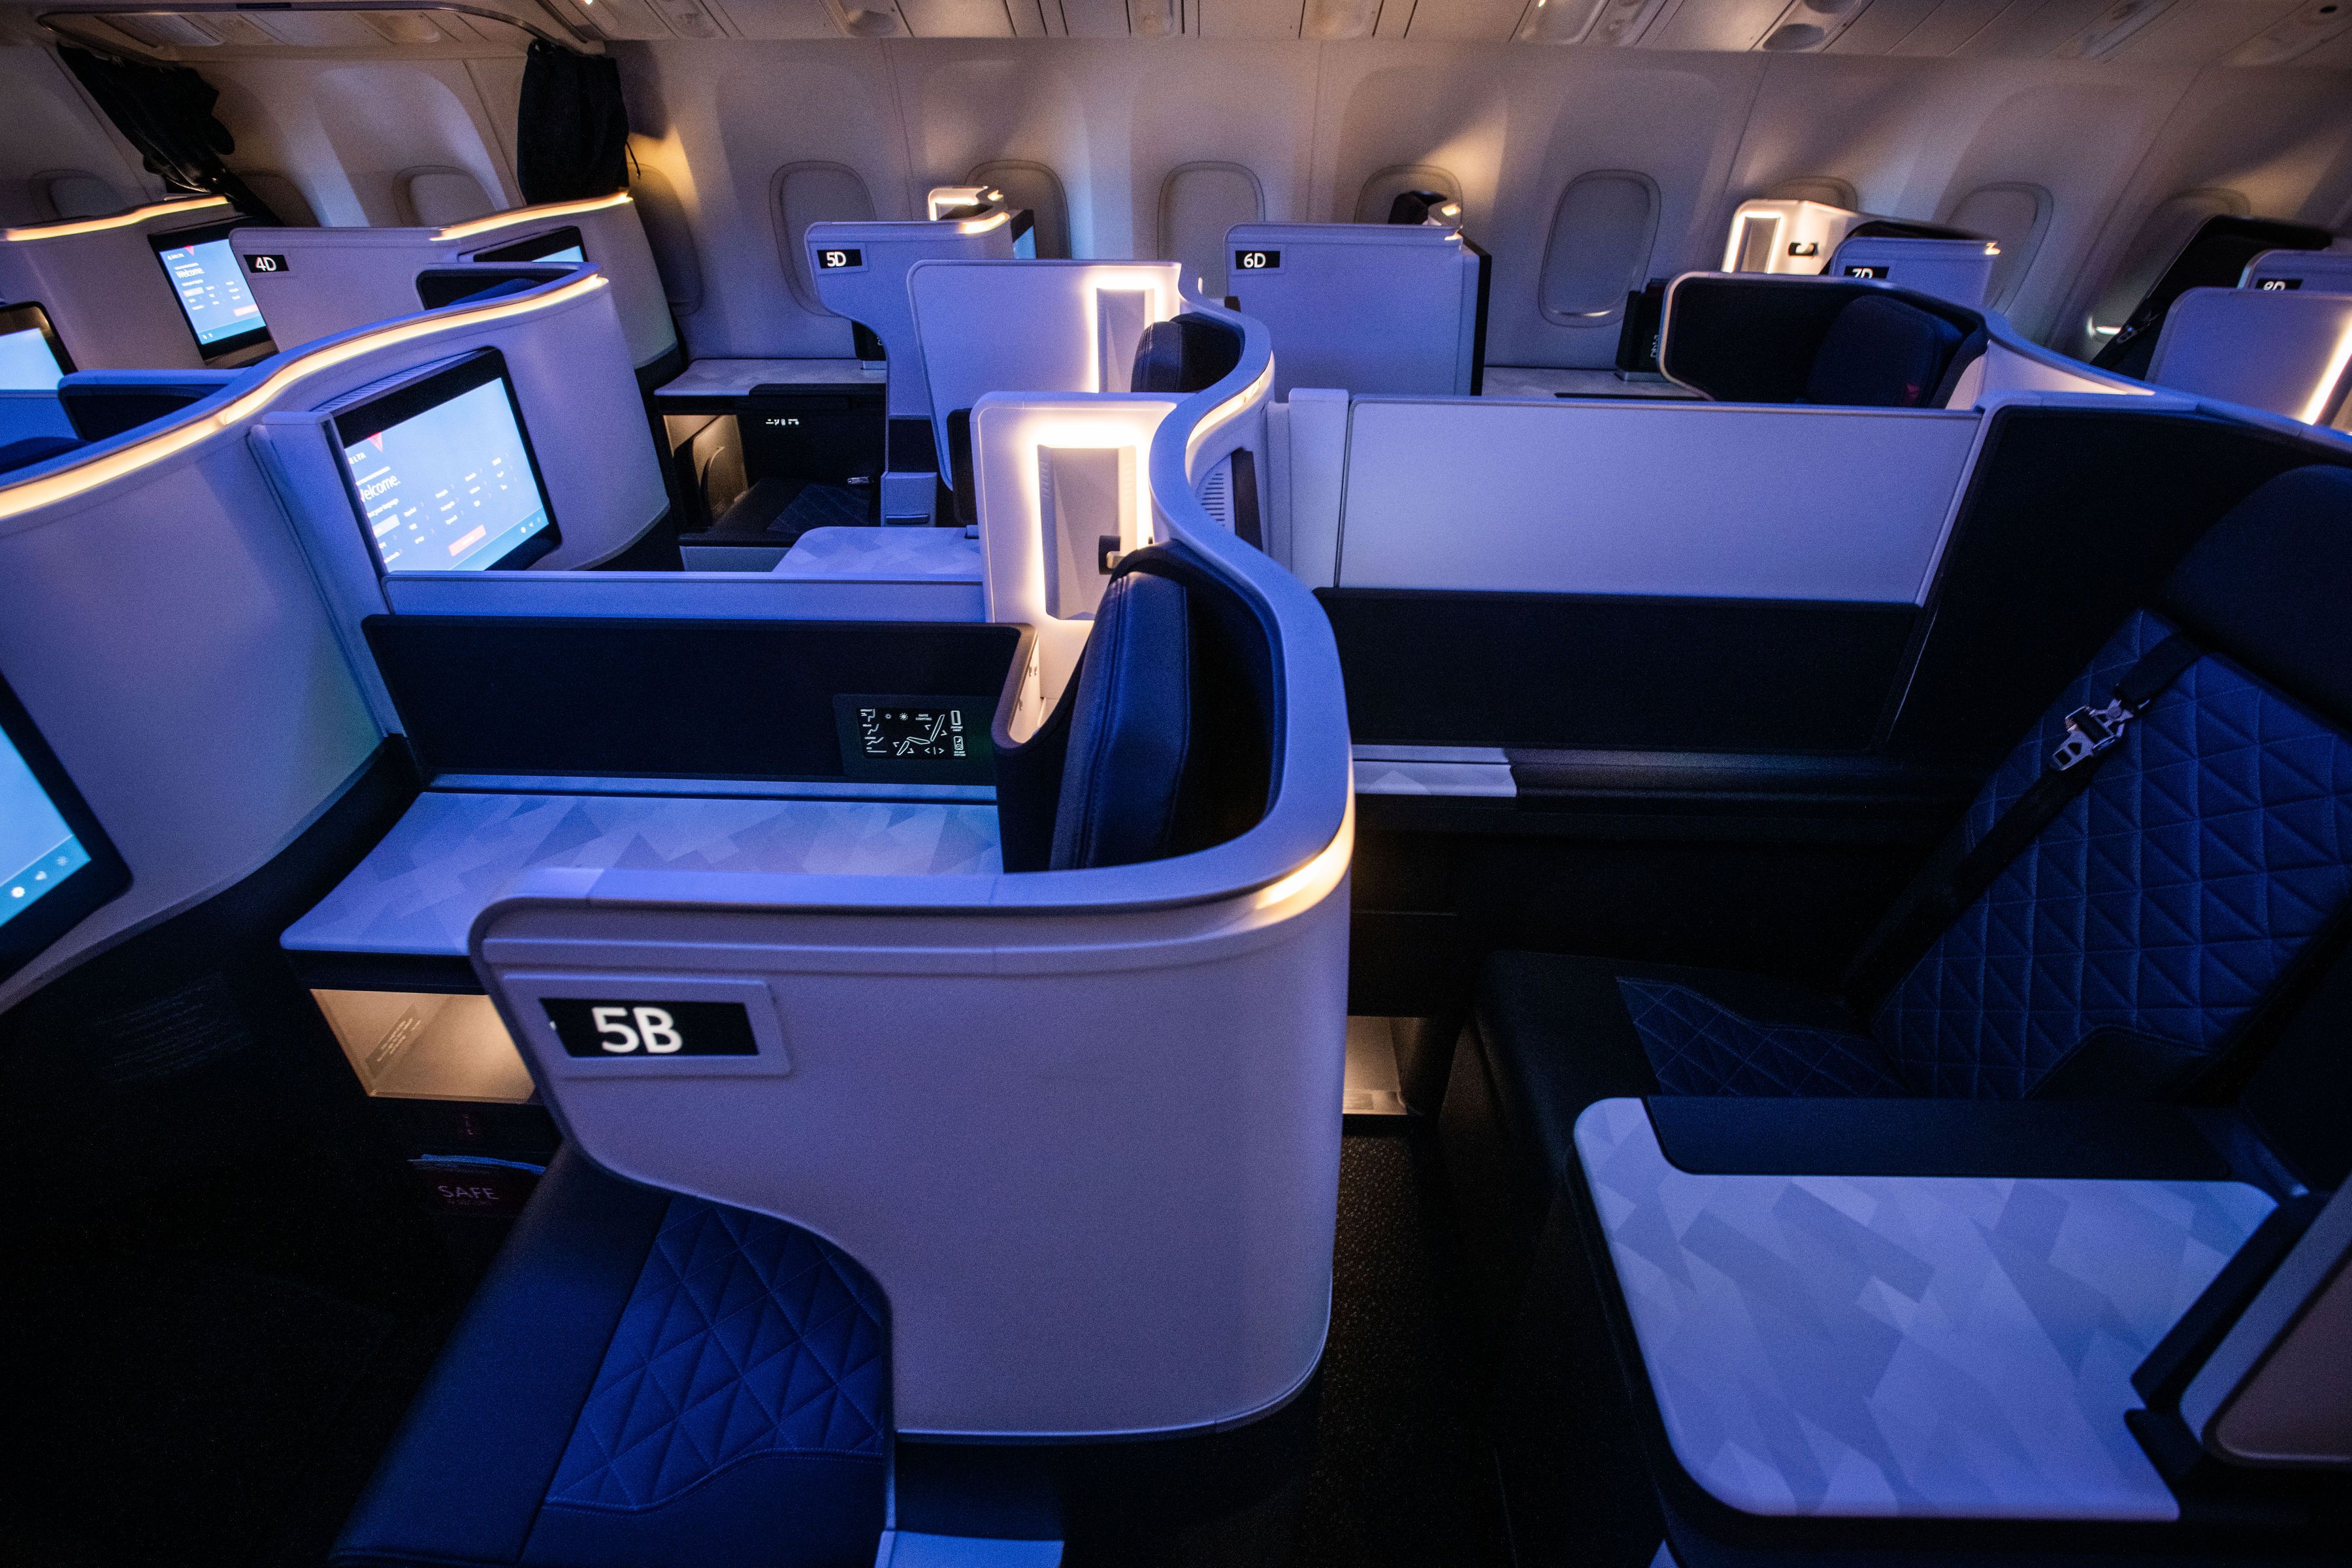 Inside the Delta Air Lines Boeing 767 Delta One Cabin.